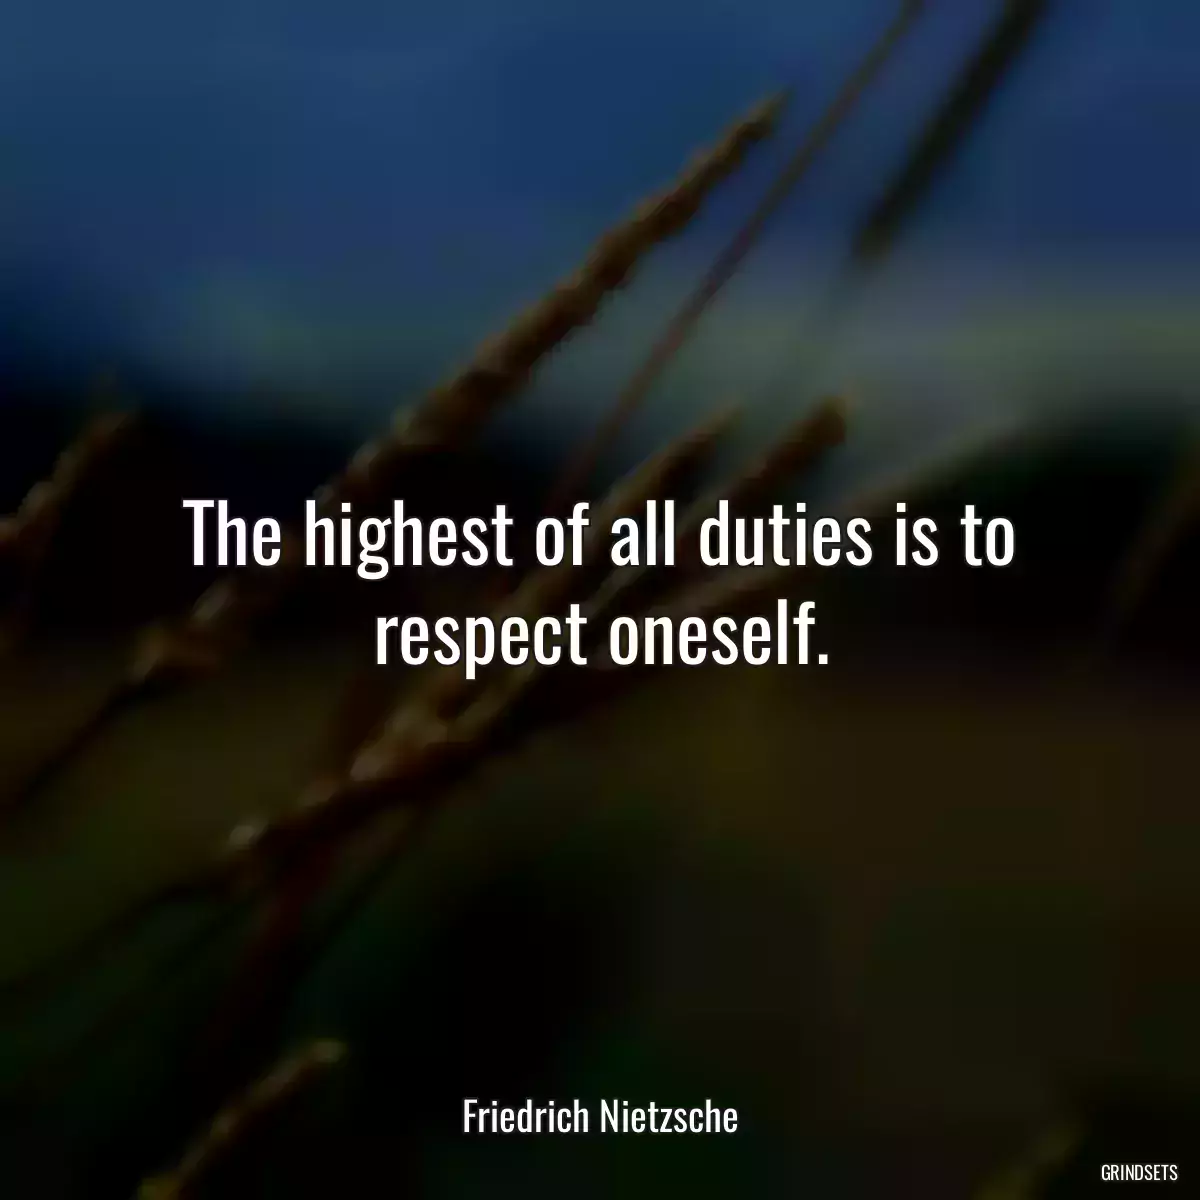 The highest of all duties is to respect oneself.